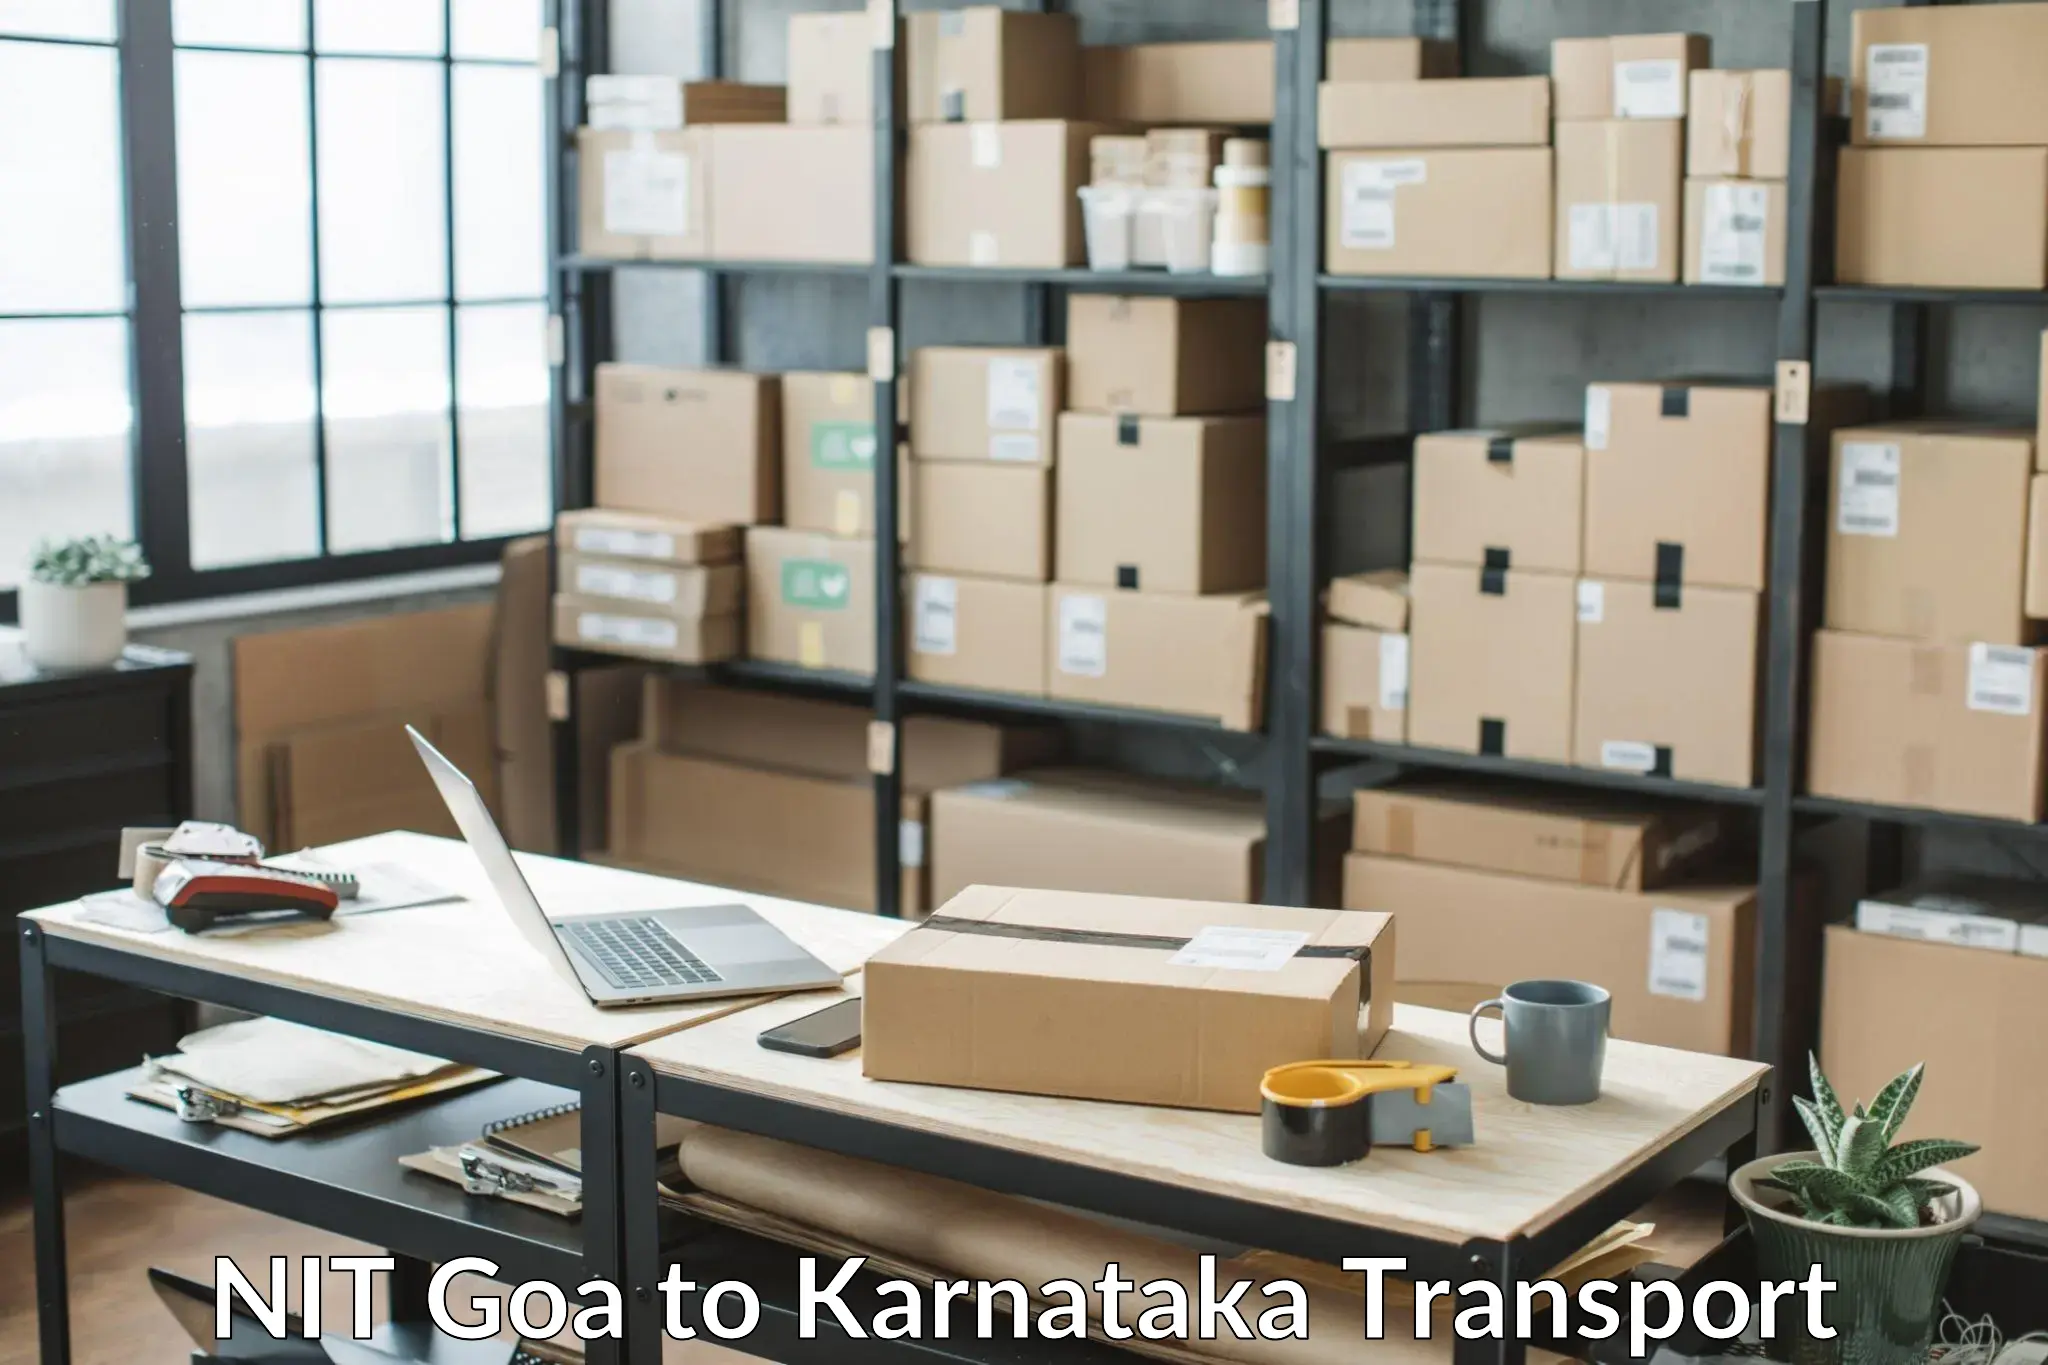 Container transport service NIT Goa to Channagiri